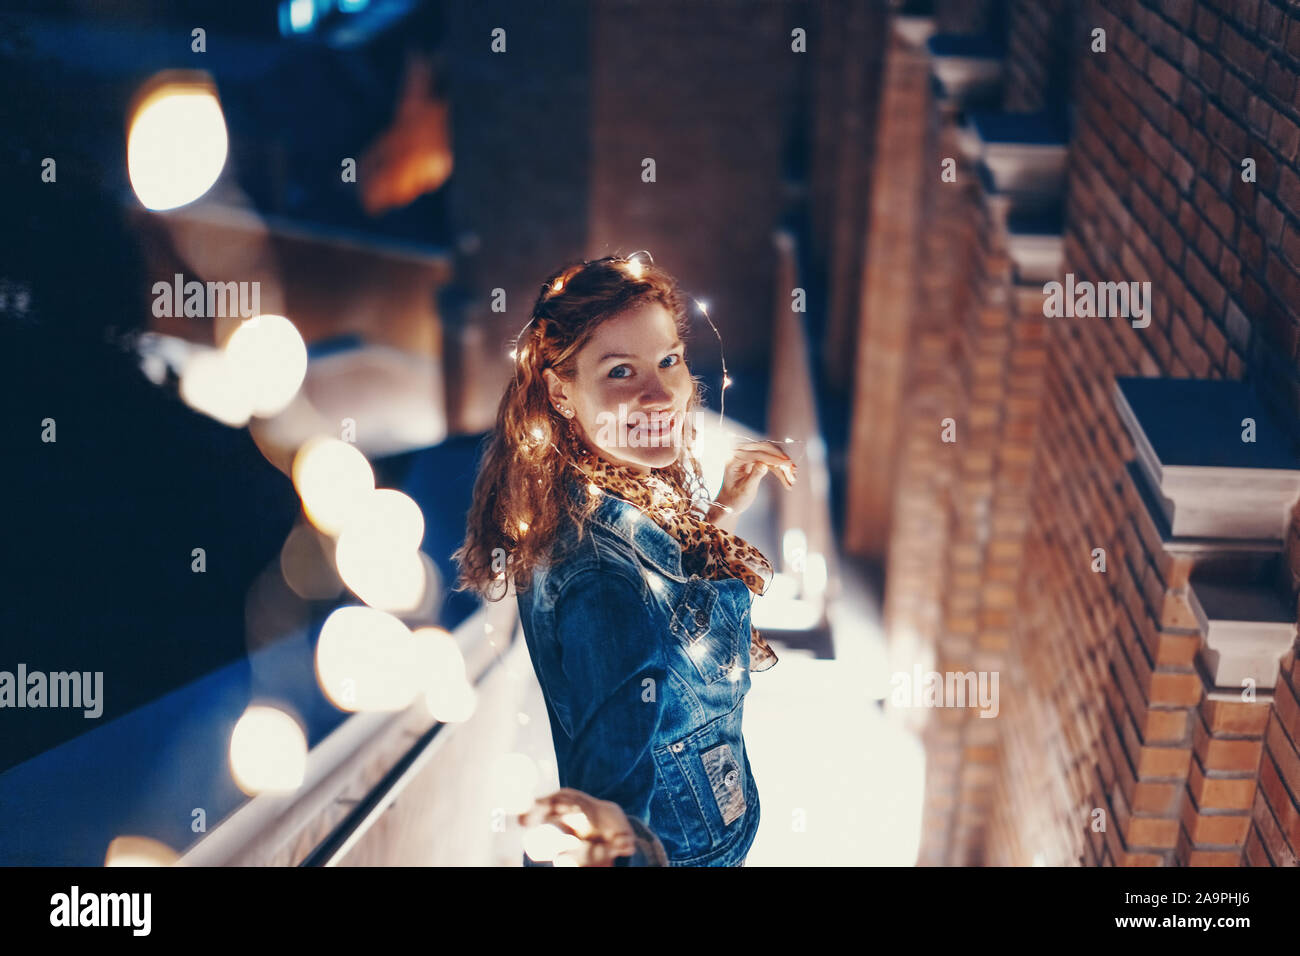 Happy young woman playing with fairy lights outdoors in city Stock Photo